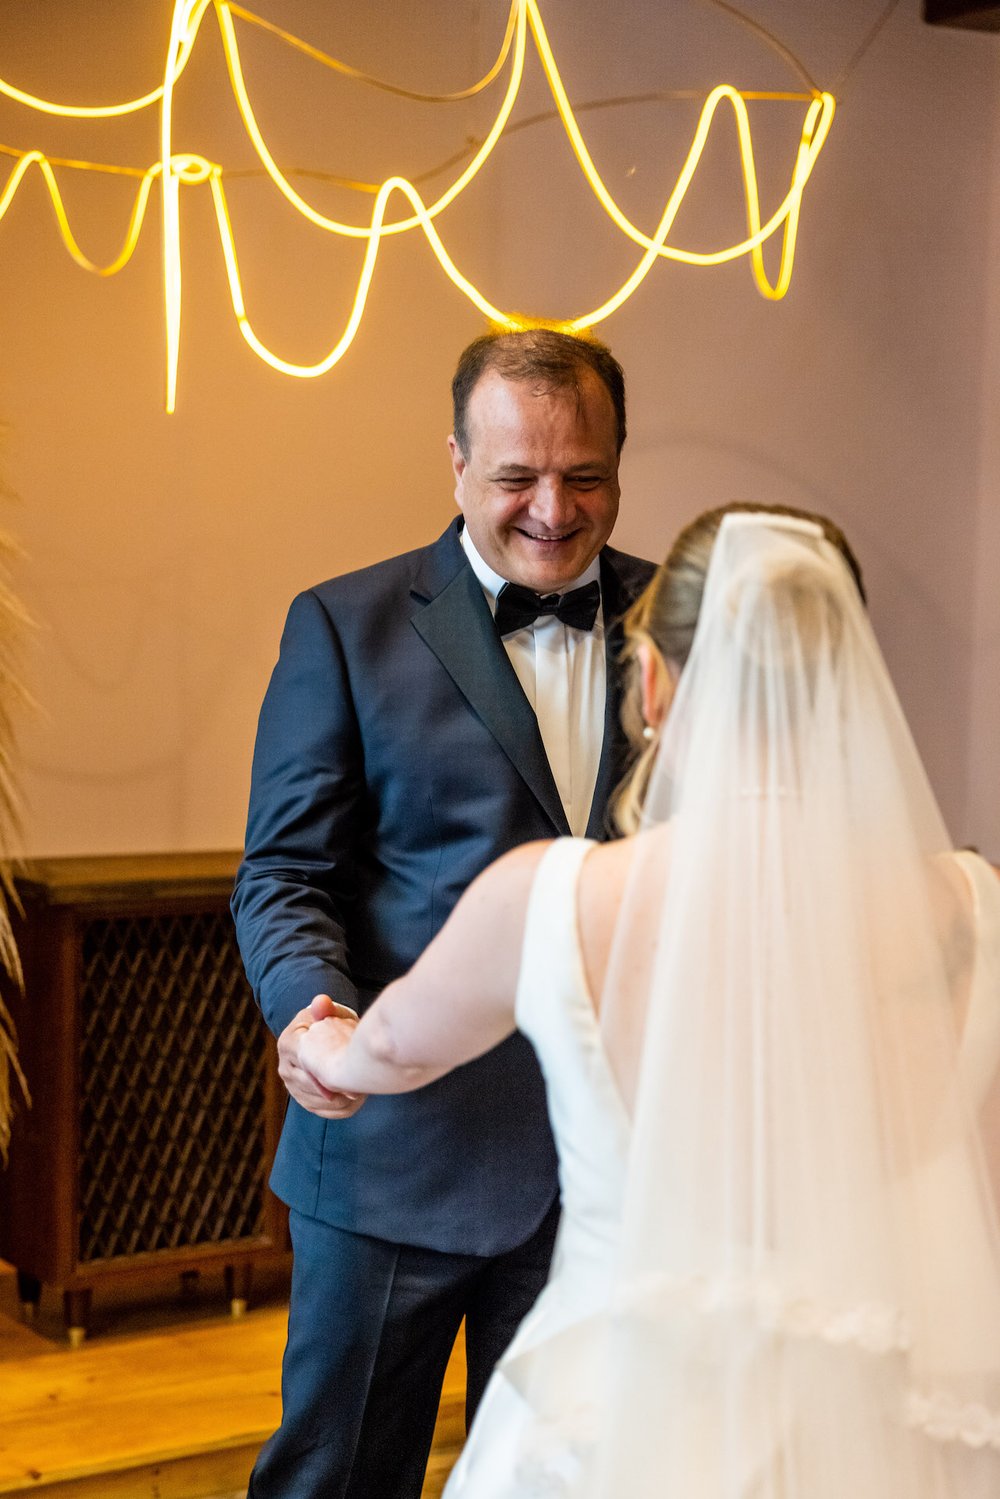 Alex Maldonado Photography | Chicago Wedding and lifestyle Photographer | wedding photos selina hotel first look with dad and bride